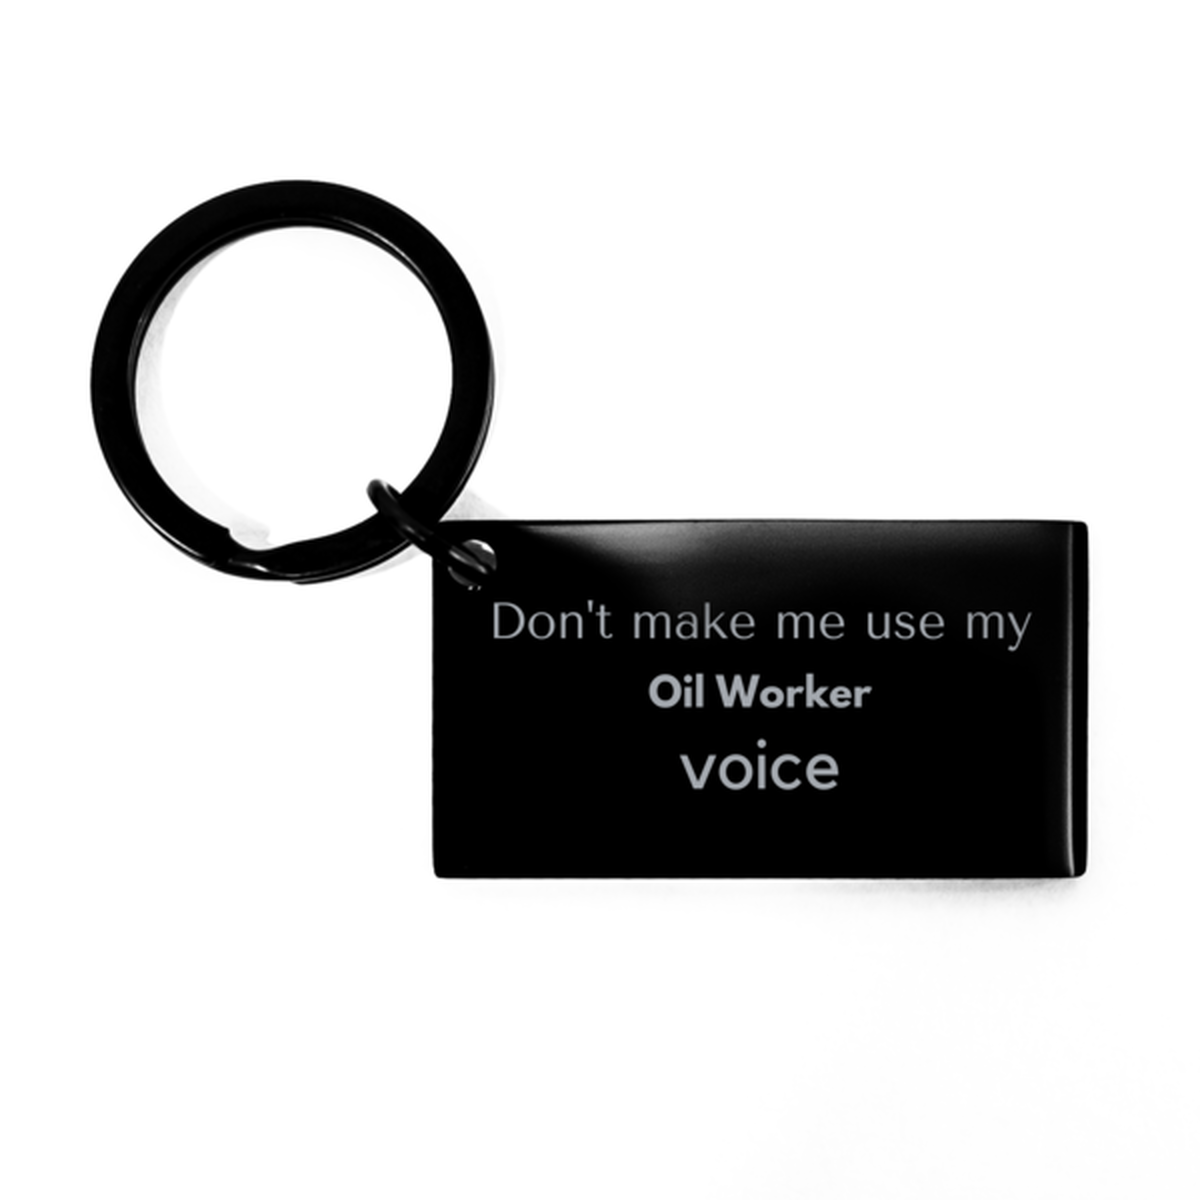 Don't make me use my Oil Worker voice, Sarcasm Oil Worker Gifts, Christmas Oil Worker Keychain Birthday Unique Gifts For Oil Worker Coworkers, Men, Women, Colleague, Friends